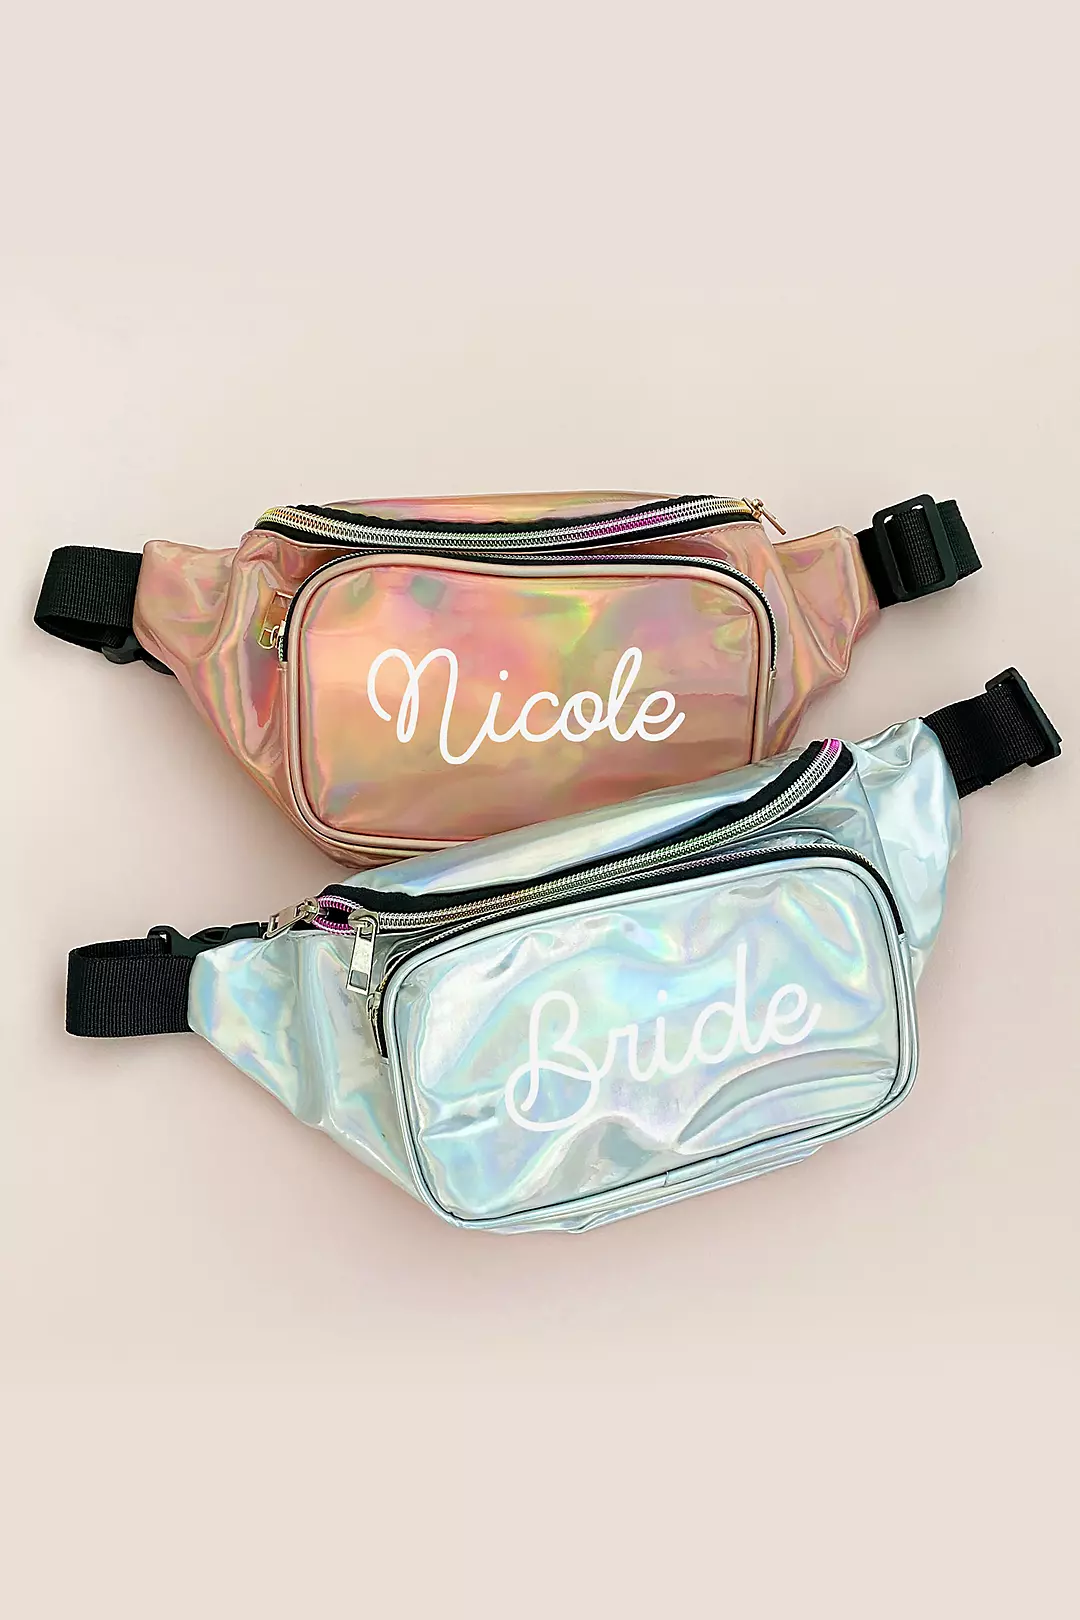 Personalized Fanny Pack Image